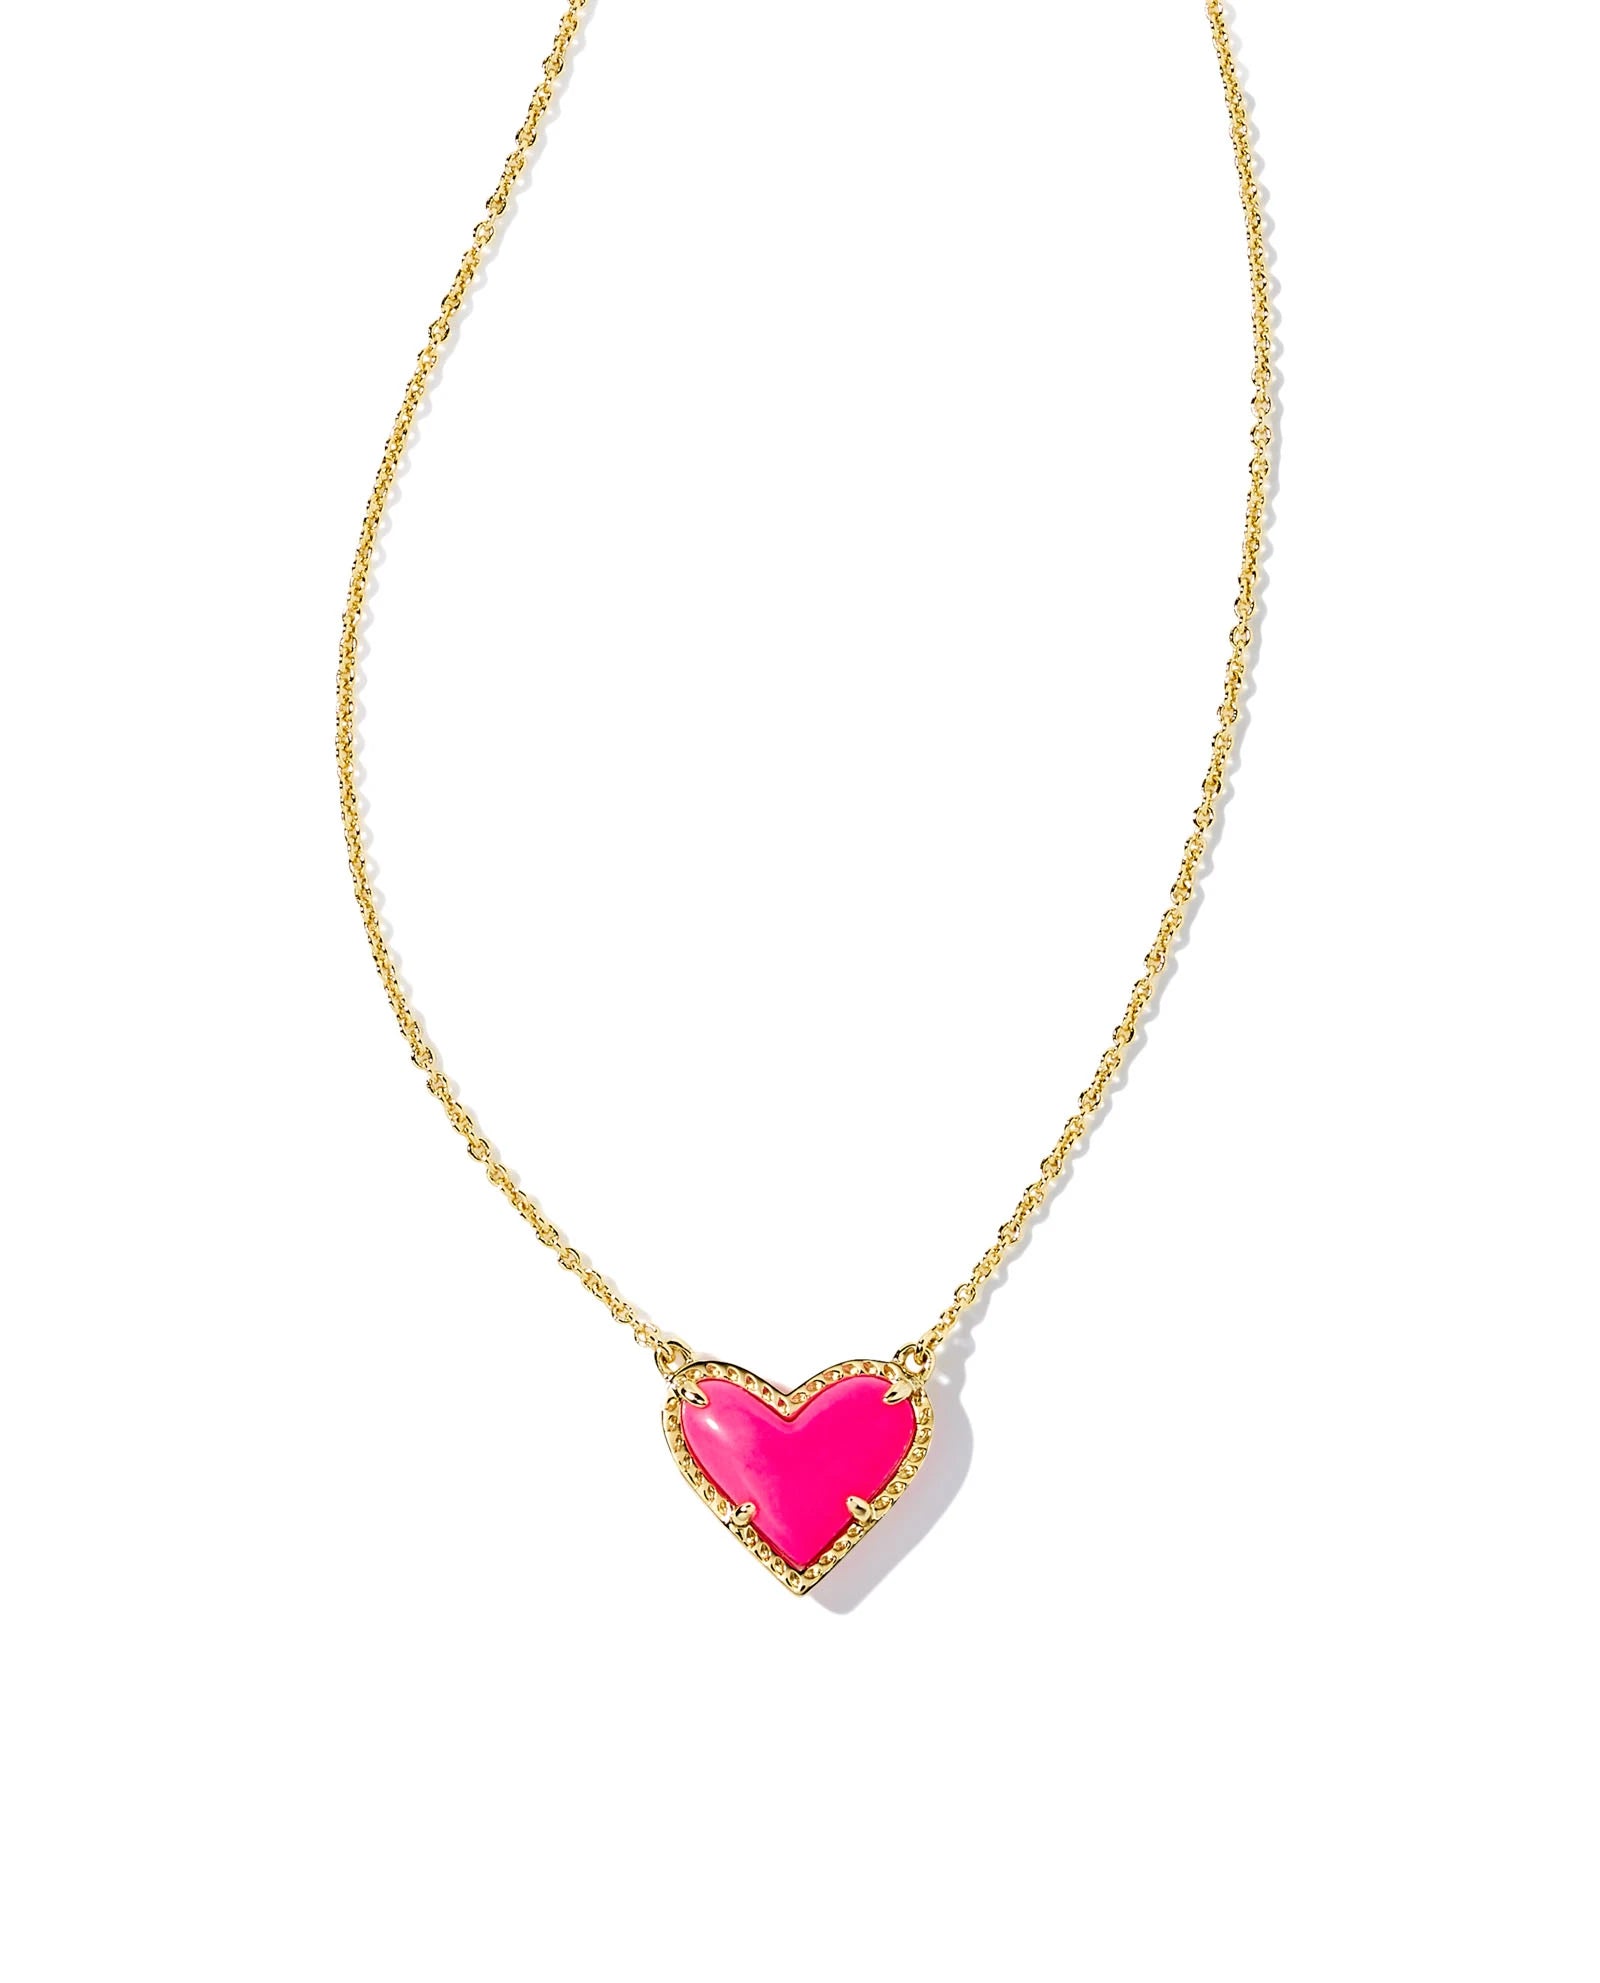 Kendra Scott Ari Heart Pendant Necklace Gold Neon Pink Magnesite-Necklaces-Kendra Scott-N1337GLD-The Twisted Chandelier